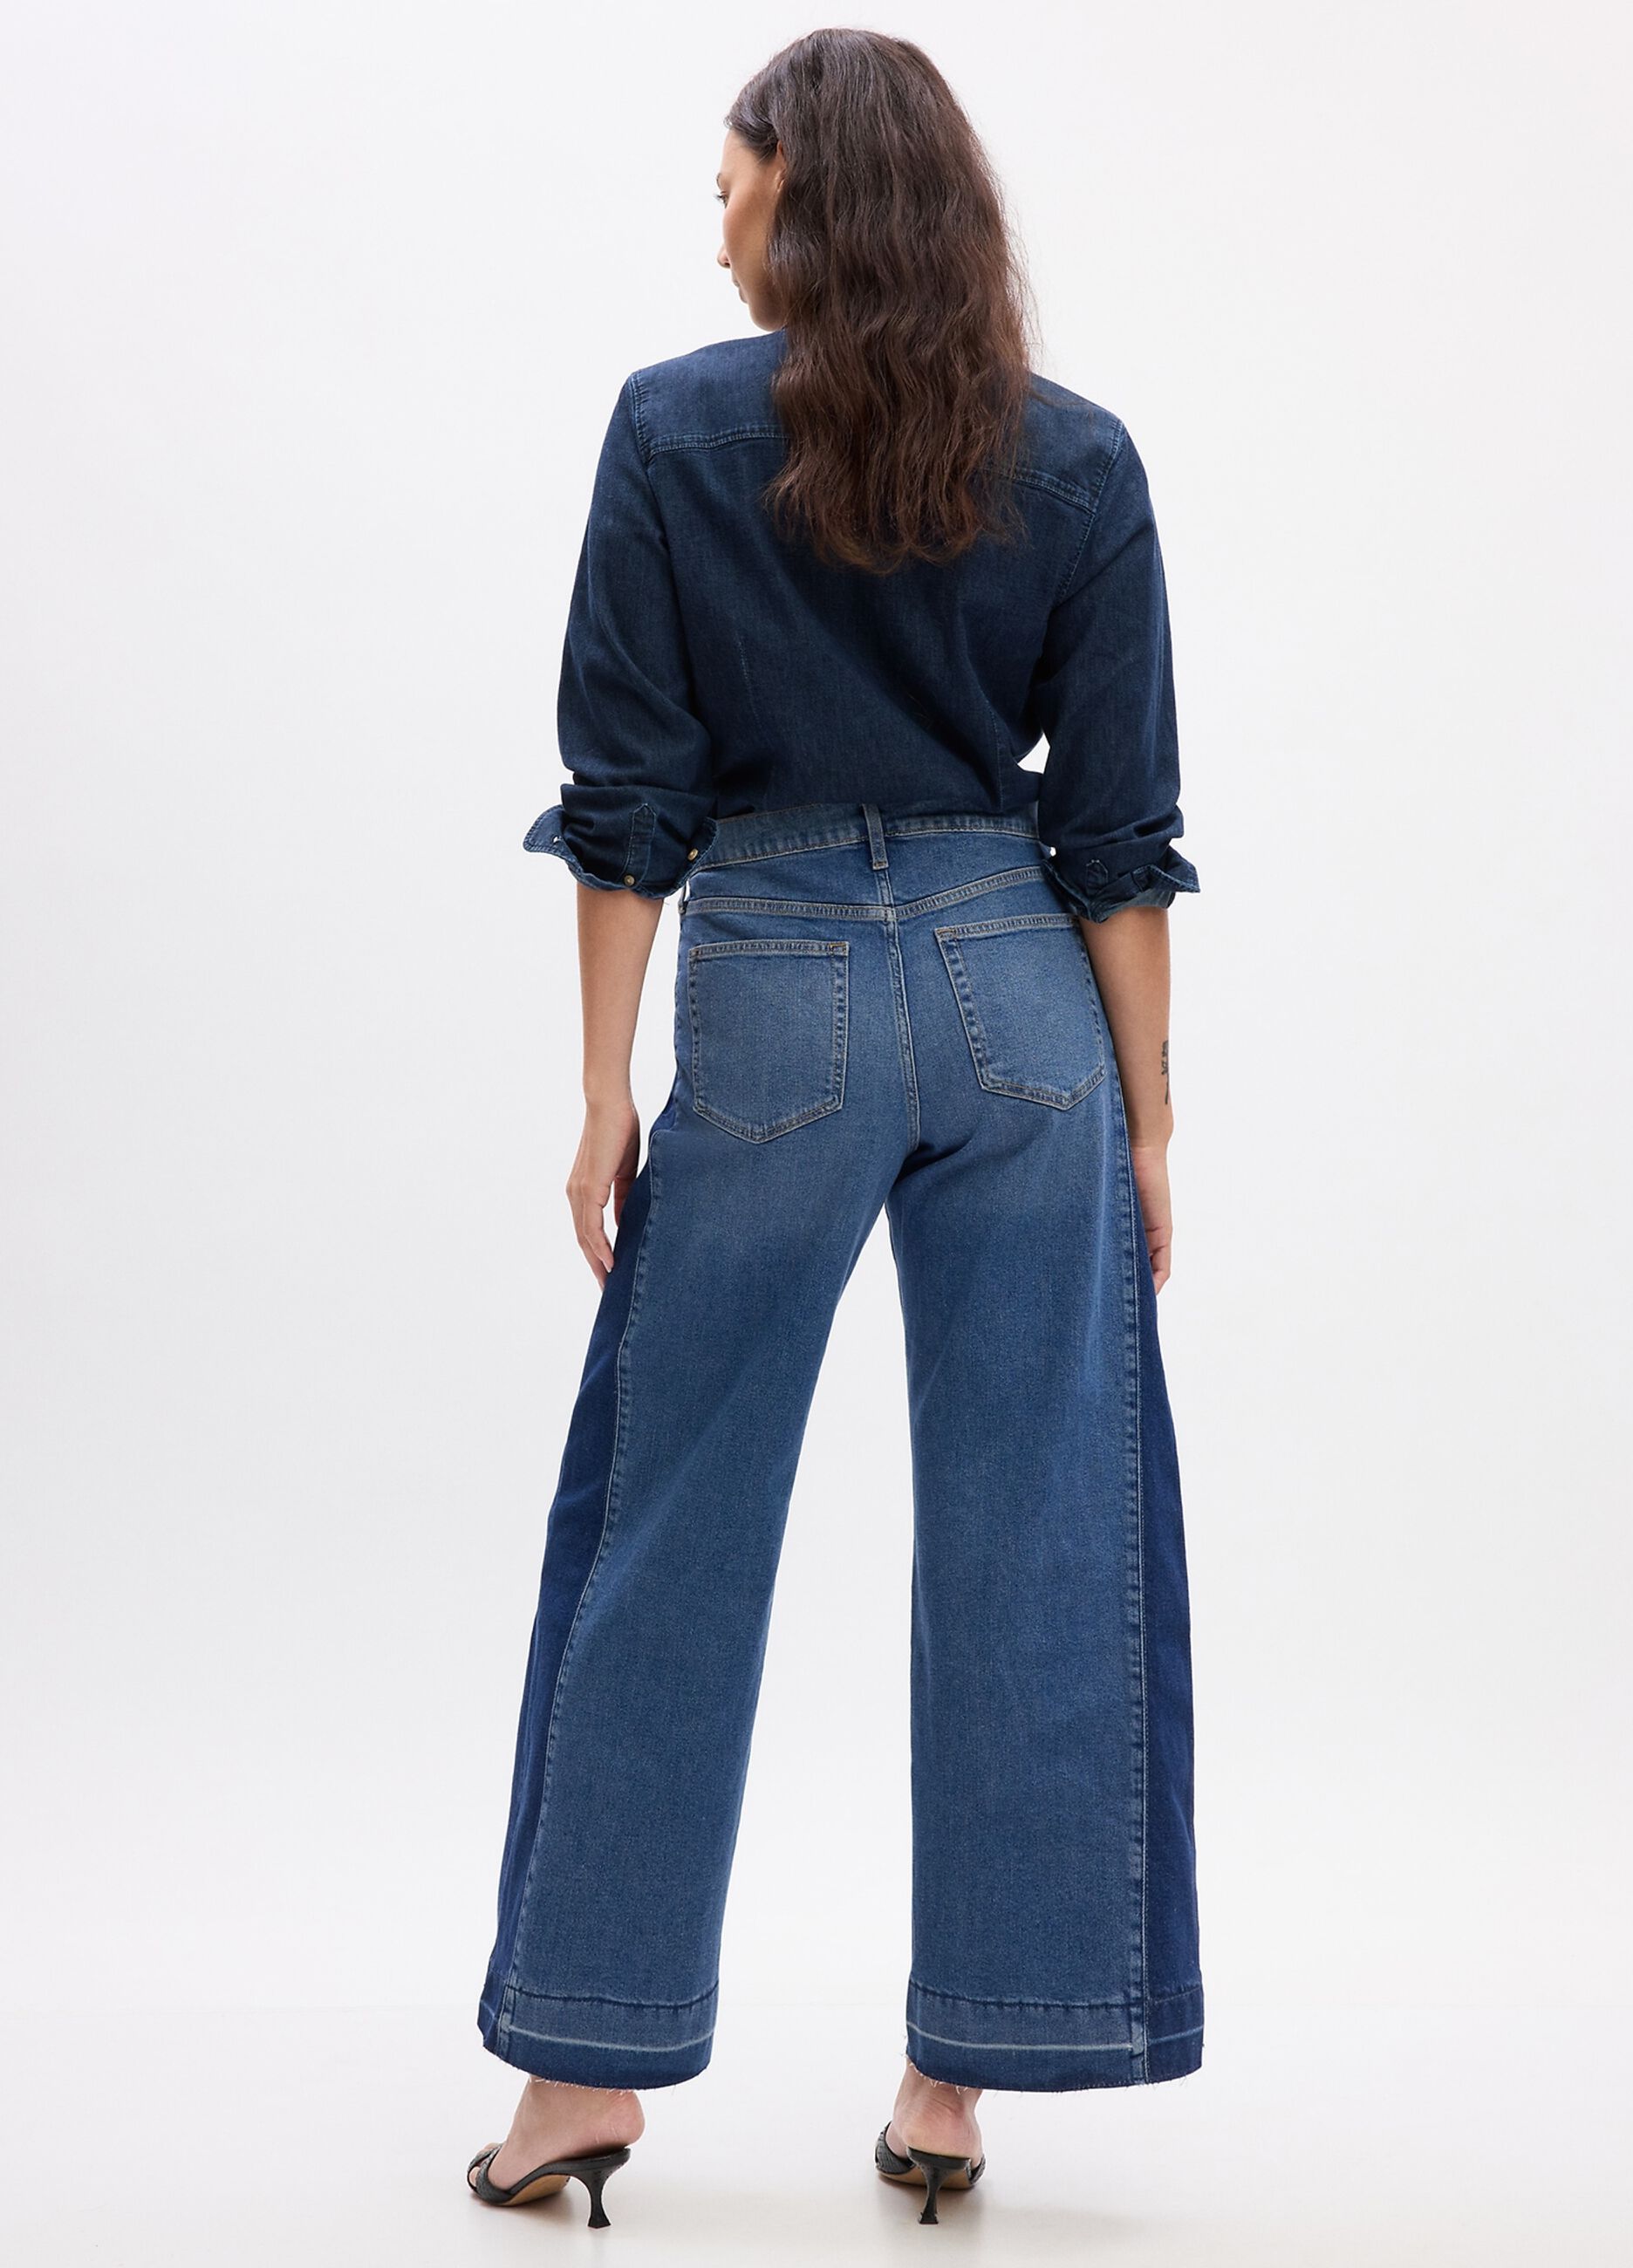 Two-tone, wide-leg jeans with high waist